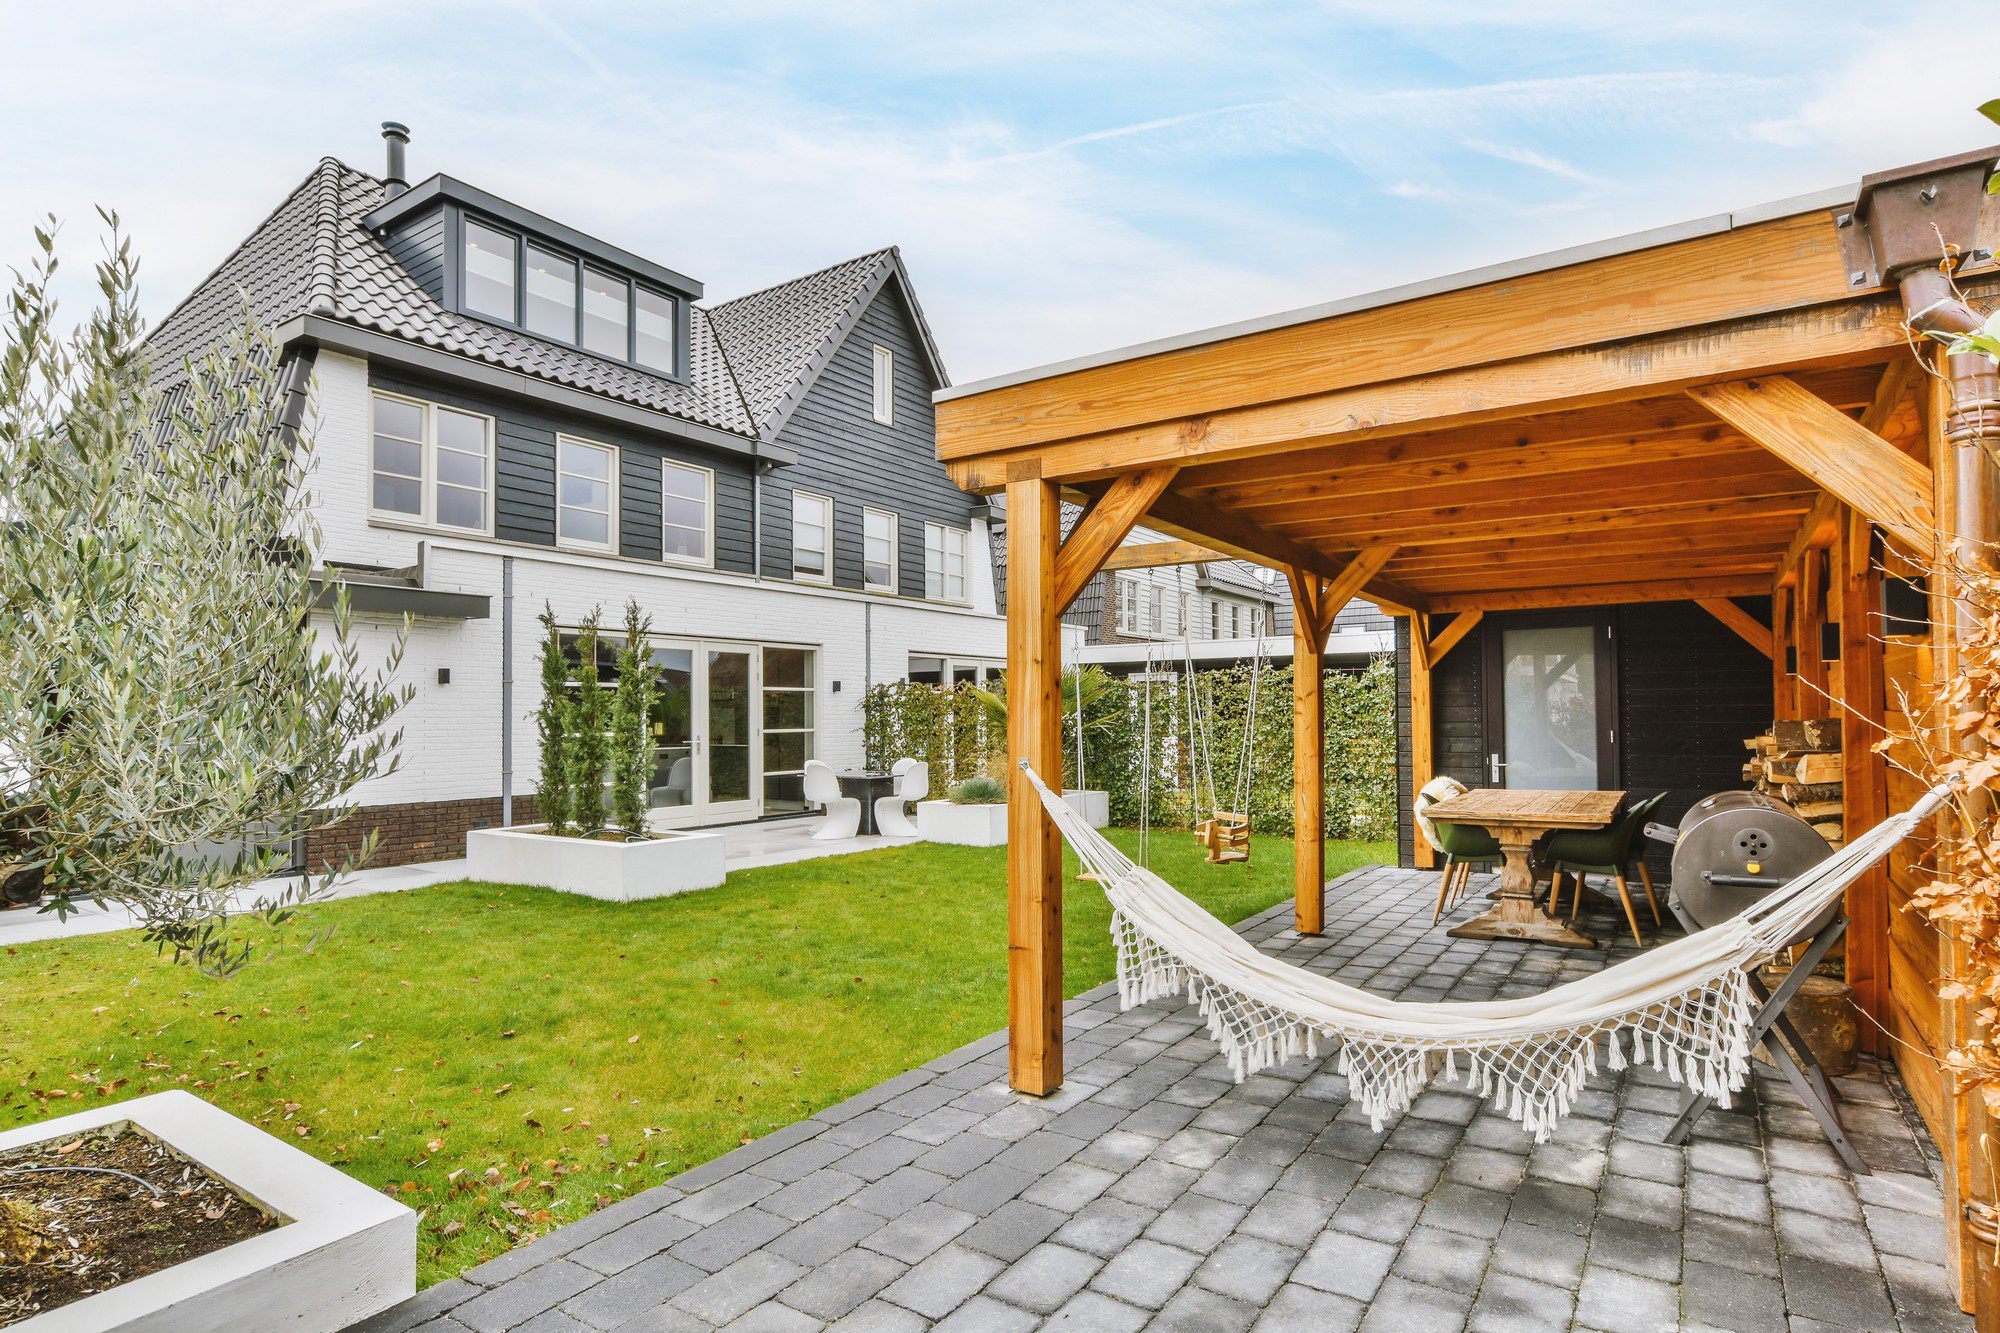 The image shows a modern two-story house with a mix of white and dark siding. There's an attached covered area with a wooden structure that provides a cosy outdoor dining and lounging space. A hammock is hanging in the foreground, adding a relaxed vibe to the setting. The backyard also features neatly trimmed grass, a well-maintained garden with a variety of plants in planters, and a paver stone patio. The house looks well-kept and the design indicates a blend of contemporary and traditional elements.